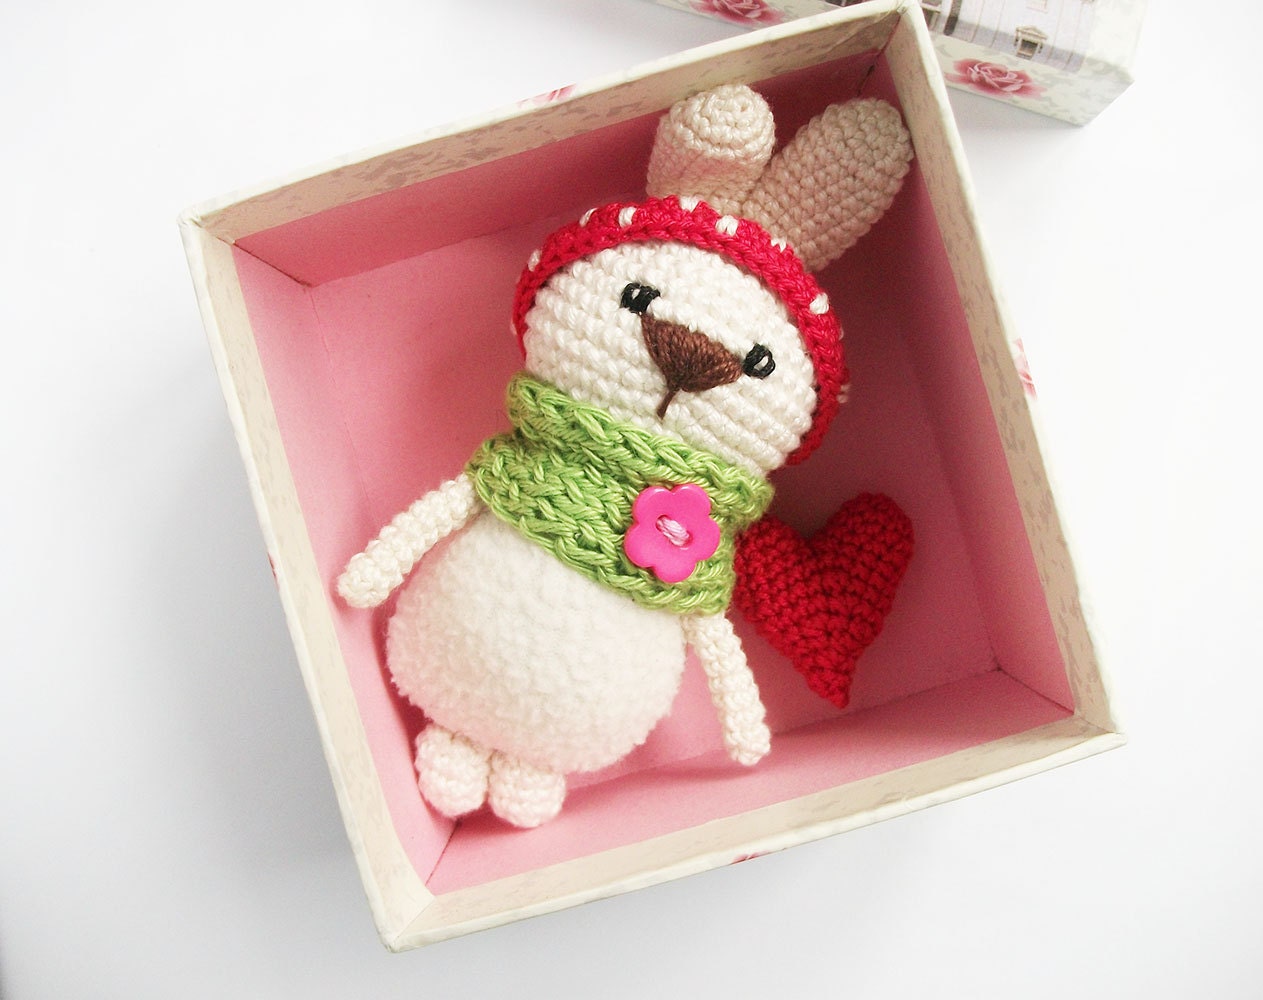 Tiny crocheted bunny soft cute crocheted toy Miniature white rabbit with red hart Stuffed animal